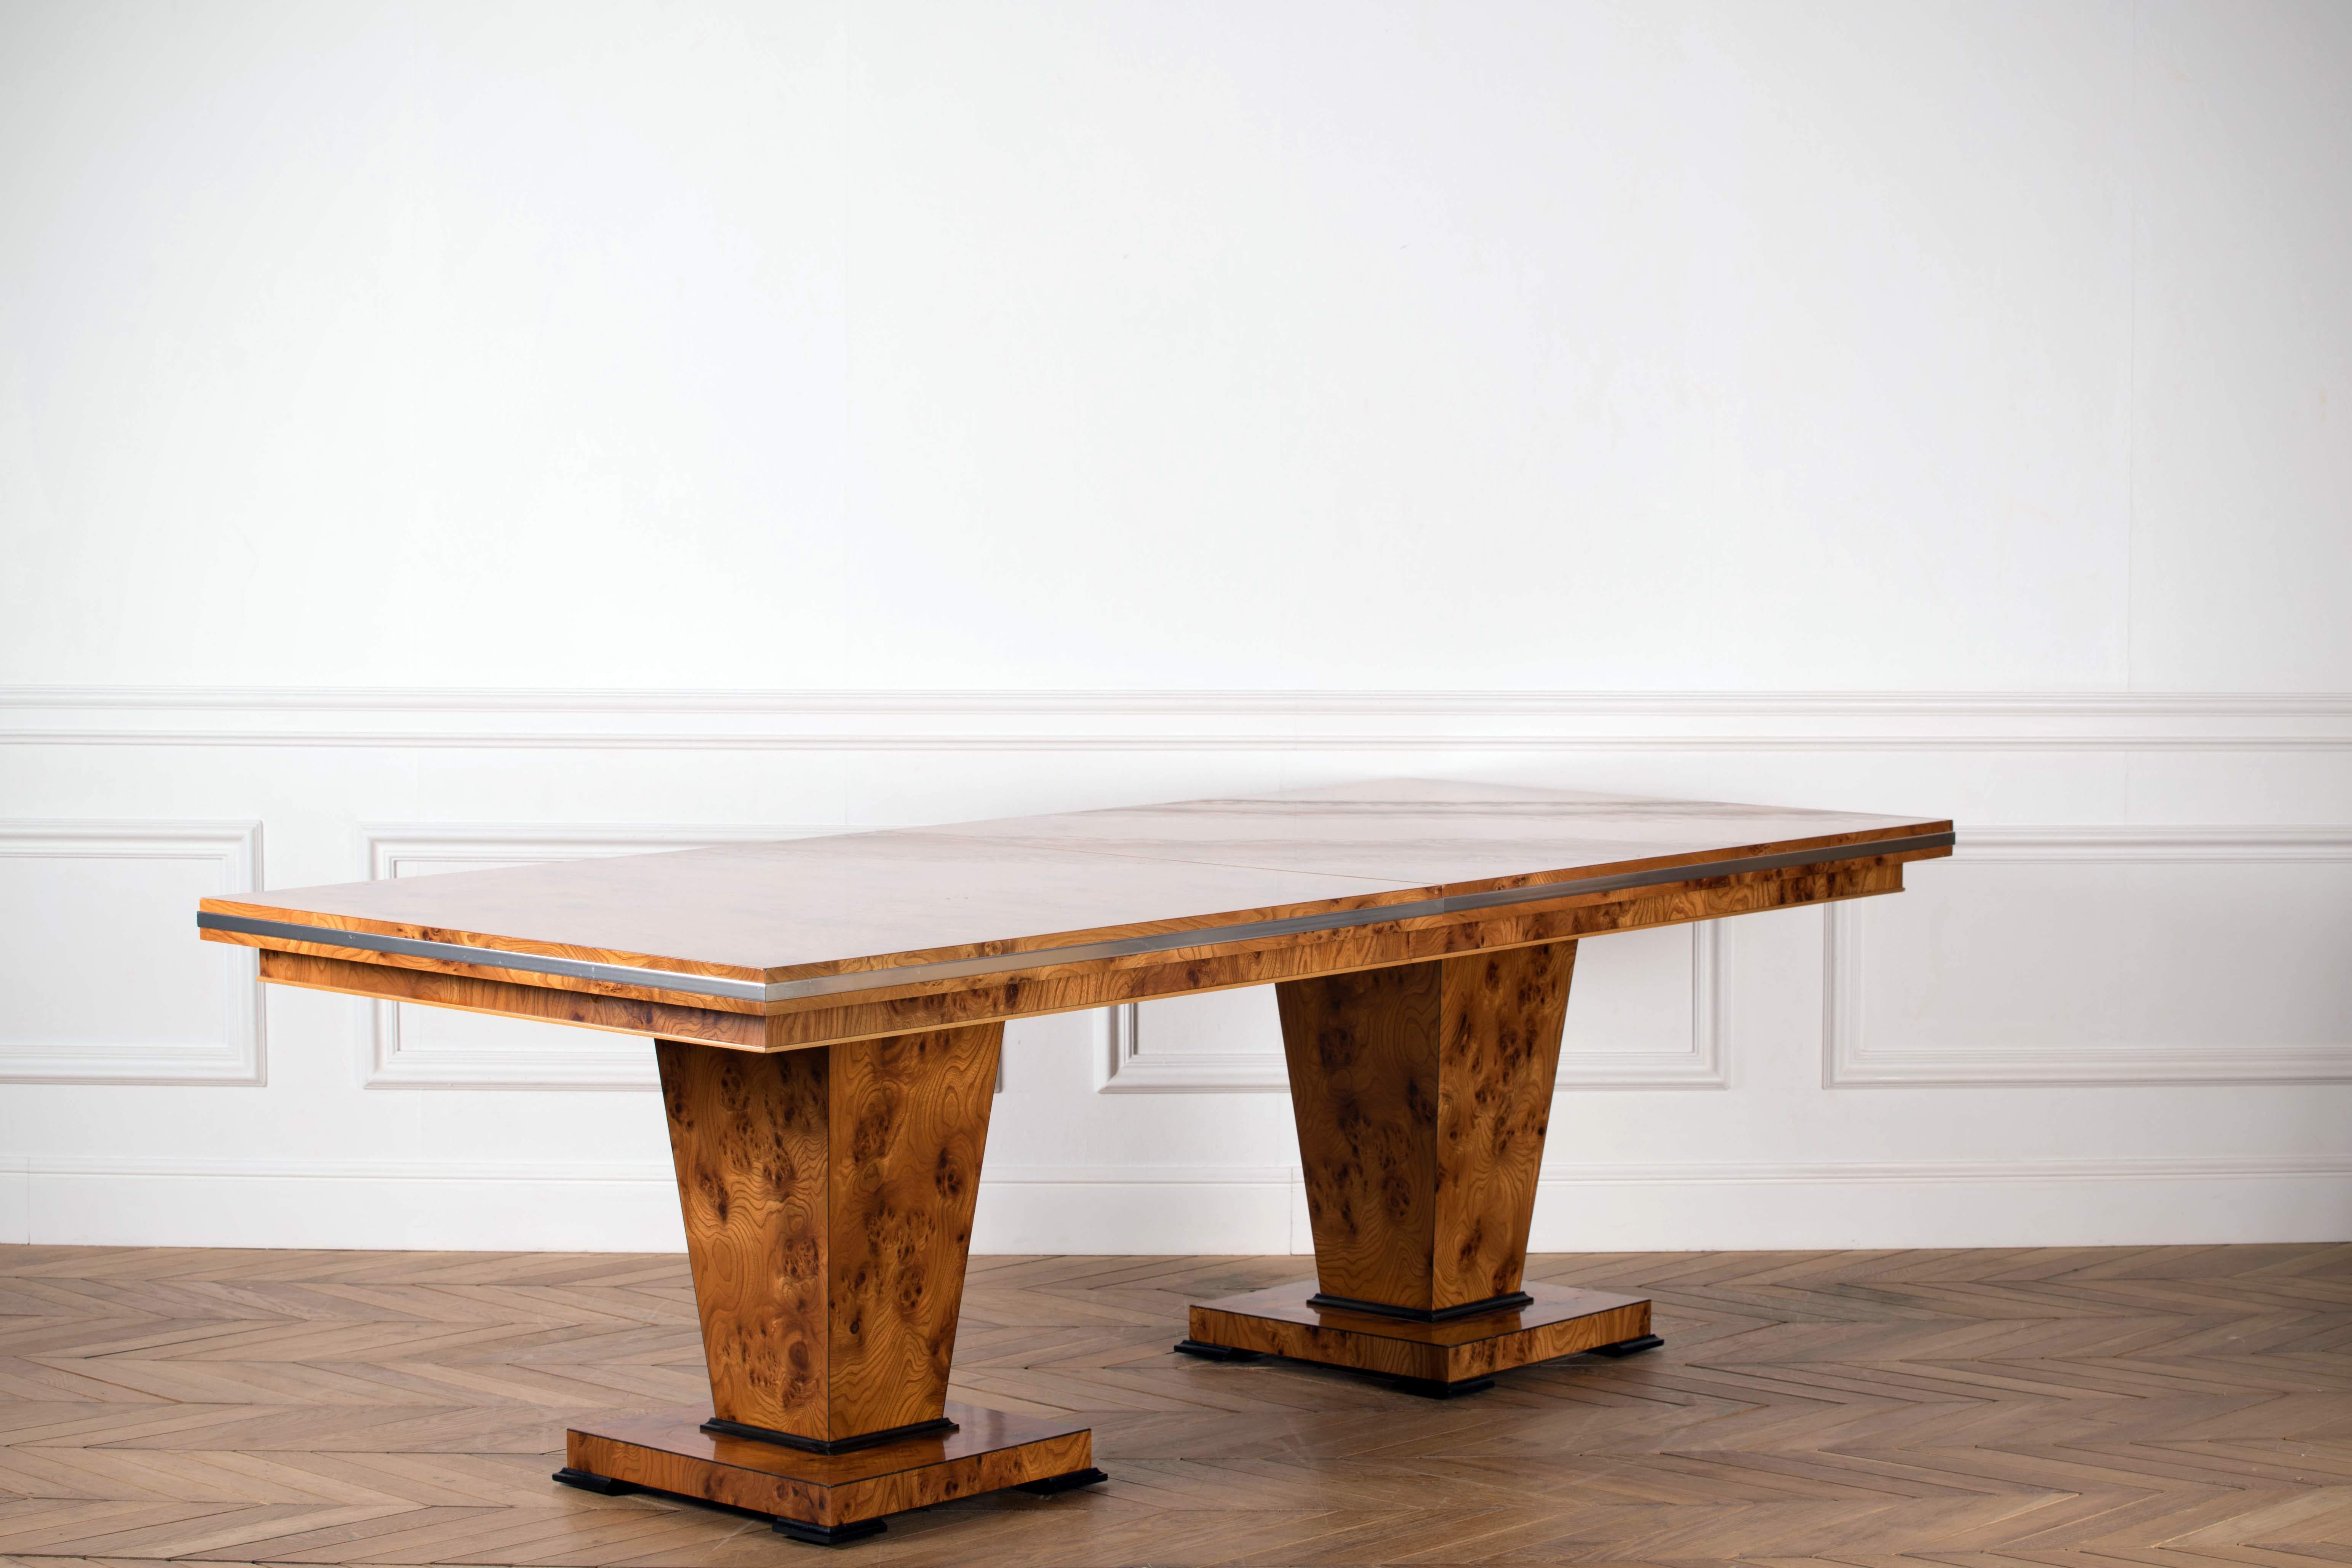 Art Deco style table labelled by Restall Brown and Clenel, late 20th century in date. Art Deco is a style of visual arts, architecture and design that first appeared in France just before World War I. It combined modernist styles with fine